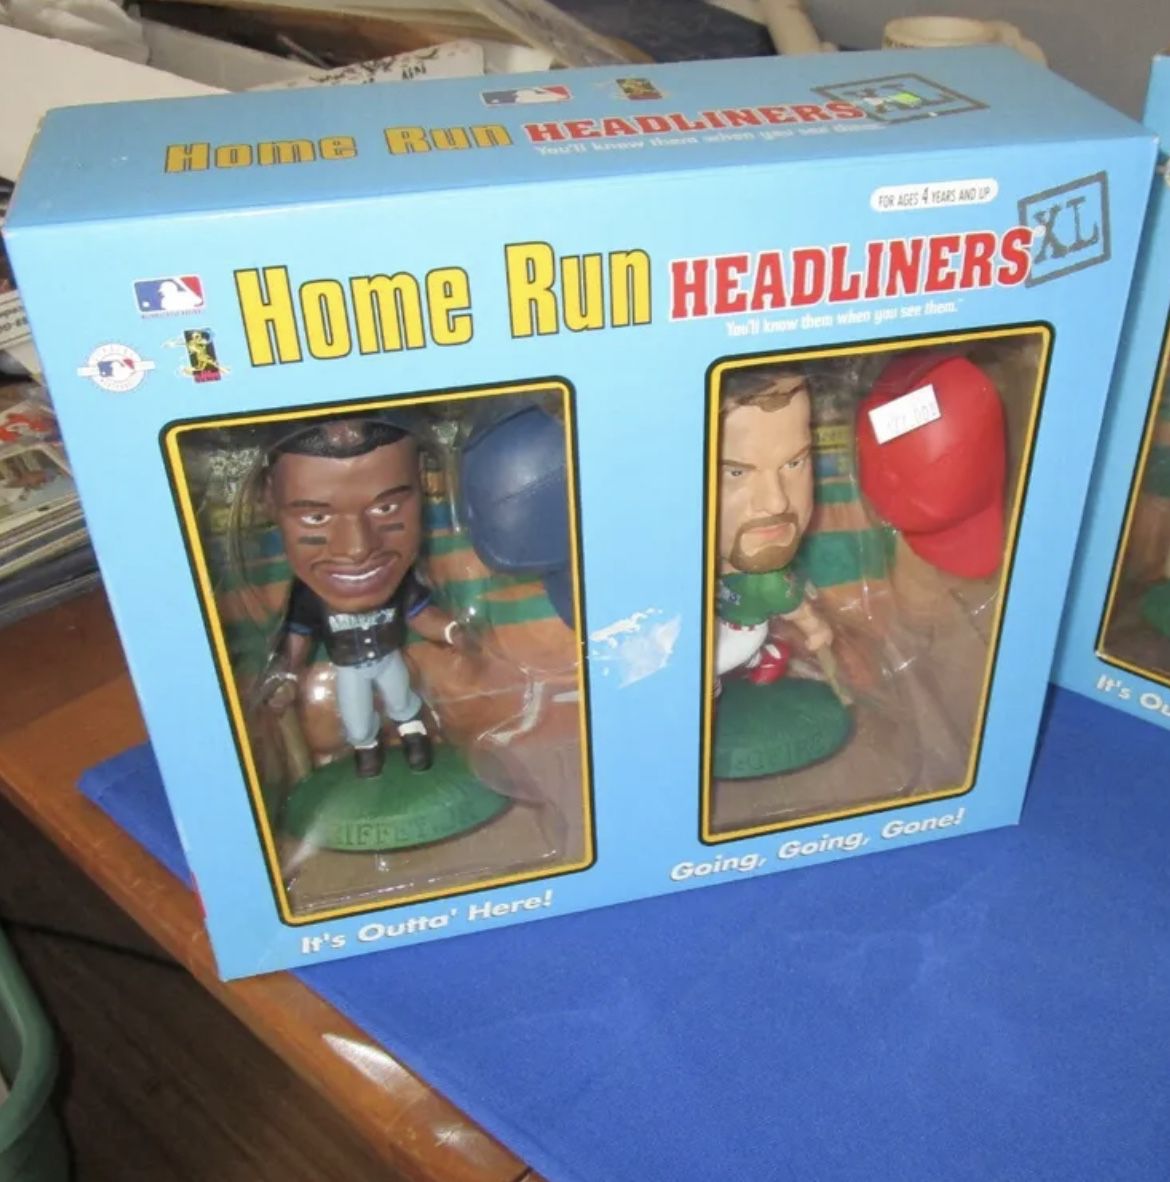 WOW Great Price ! 1998 12”Home Run Headlines Baseball Statue Set Ken Griffey Mark McGwire, Sold For $29.99+tax My Price $6 Firm 